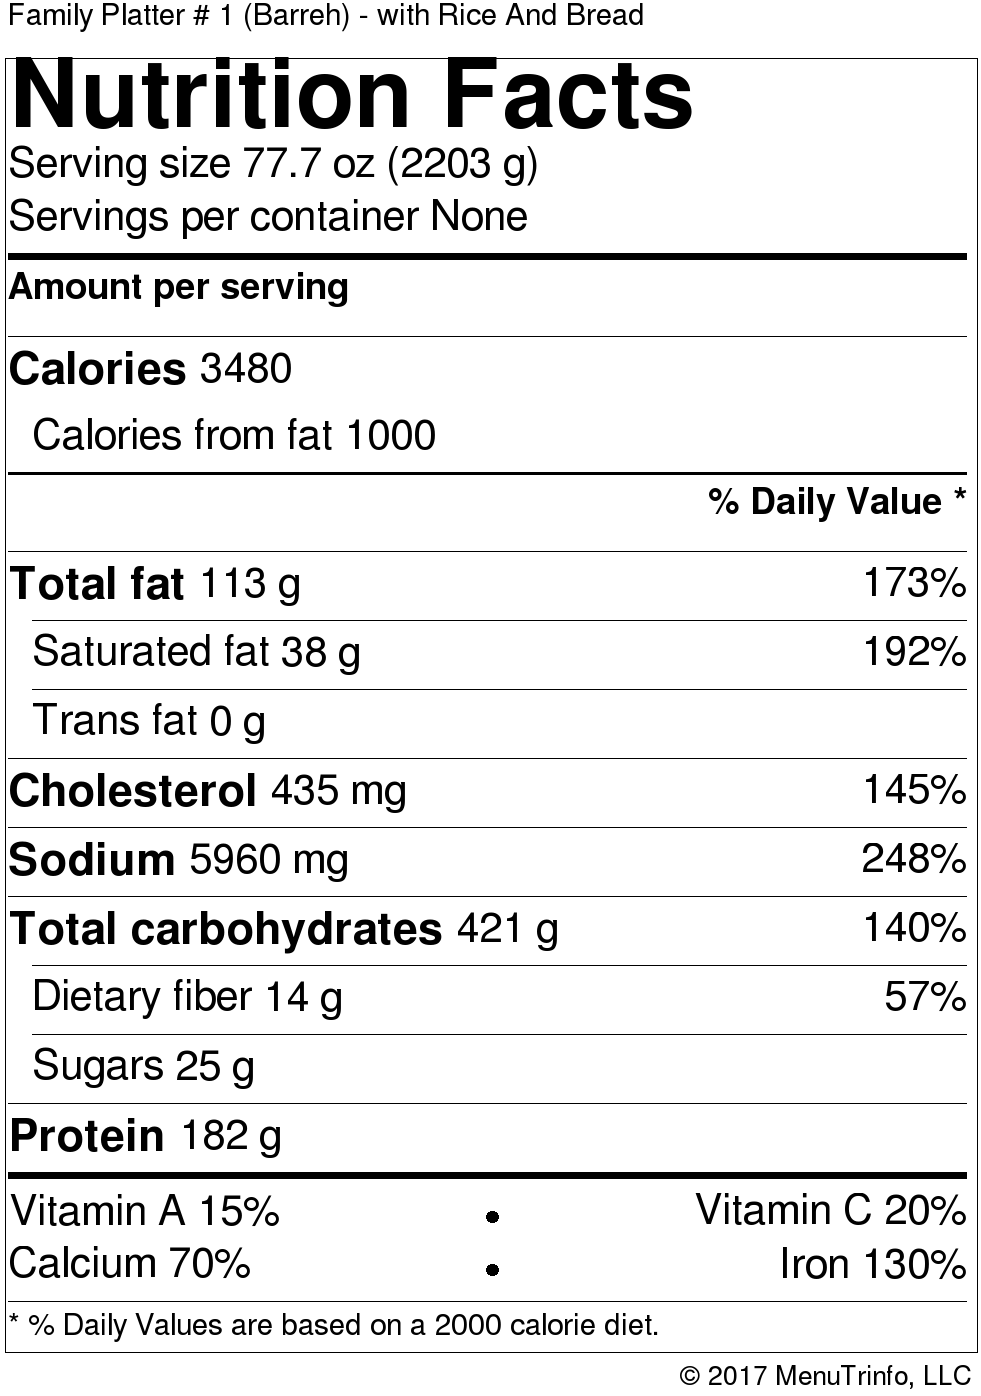 Moby dick rice nutrition facts